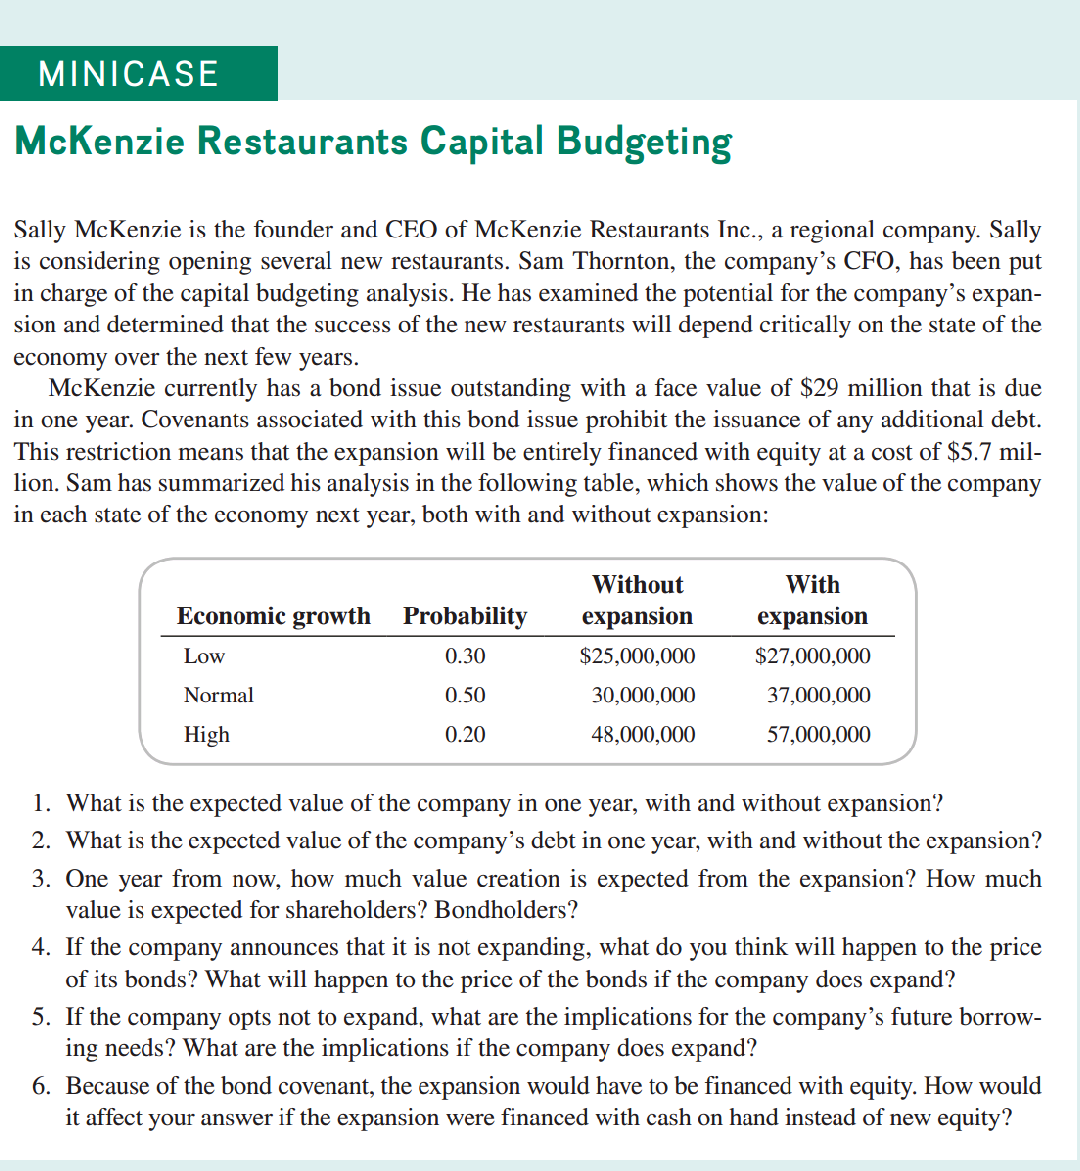 MINICASE
McKenzie Restaurants Capital Budgeting
Sally McKenzie is the founder and CEO of McKenzie Restaurants Inc., a regional company. Sally
is considering opening several new restaurants. Sam Thornton, the company's CFO, has been put
in charge of the capital budgeting analysis. He has examined the potential for the company's expan-
sion and determined that the success of the new restaurants will depend critically on the state of the
economy over the next few years.
McKenzie currently has a bond issue outstanding with a face value of $29 million that is due
in one year. Covenants associated with this bond issue prohibit the issuance of any additional debt.
This restriction means that the expansion will be entirely financed with equity at a cost of $5.7 mil-
lion. Sam has summarized his analysis in the following table, which shows the value of the company
in each state of the economy next year, both with and without expansion:
Without
With
Economic growth
Probability
expansion
expansion
Low
0.30
$25,000,000
$27,000,000
Normal
0.50
30,000,000
37,000,000
High
0.20
48,000,000
57,000,000
1. What is the expected value of the company in one year, with and without expansion?
2. What is the expected value of the company's debt in one year, with and without the expansion?
3. One year from now, how much value creation is expected from the expansion? How much
value is expected for shareholders? Bondholders?
4. If the company announces that it is not expanding, what do you think will happen to the price
of its bonds? What will happen to the price of the bonds if the company does expand?
5. If the company opts not to expand, what are the implications for the company's future borrow-
ing needs? What are the implications if the company does expand?
6. Because of the bond covenant, the expansion would have to be financed with equity. How would
it affect your answer if the expansion were financed with cash on hand instead of new equity?
